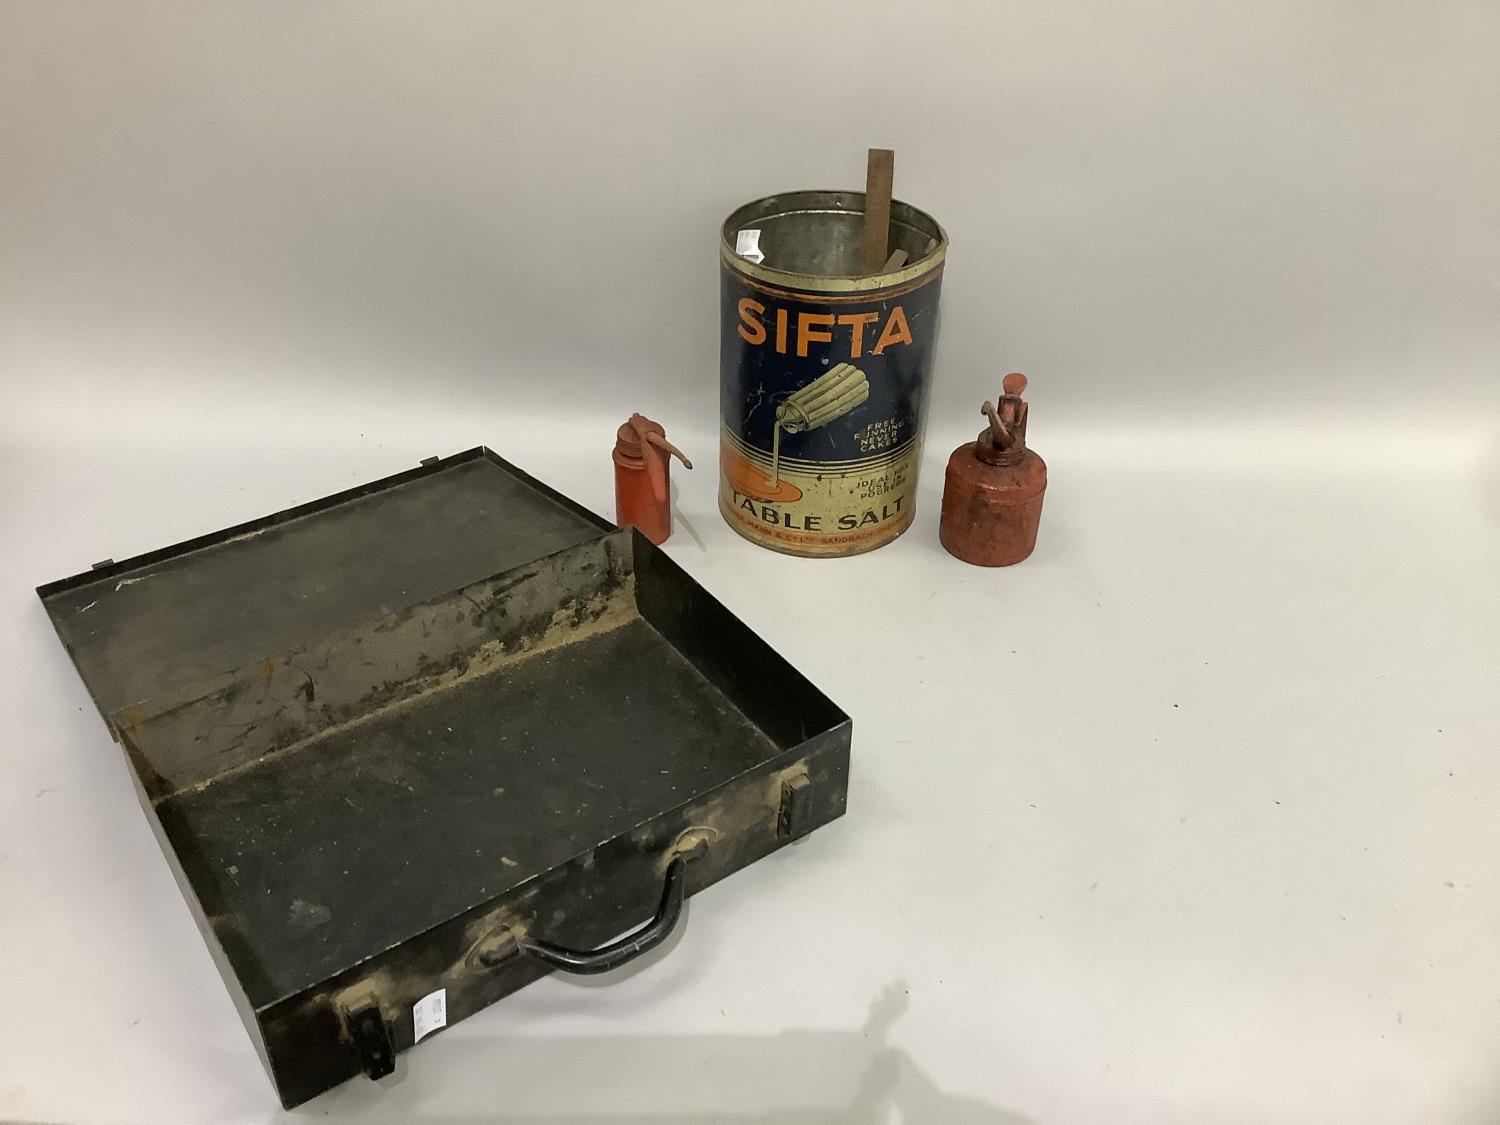 A vintage black metal document case together with two oil cans and a large Sifta table salt drum